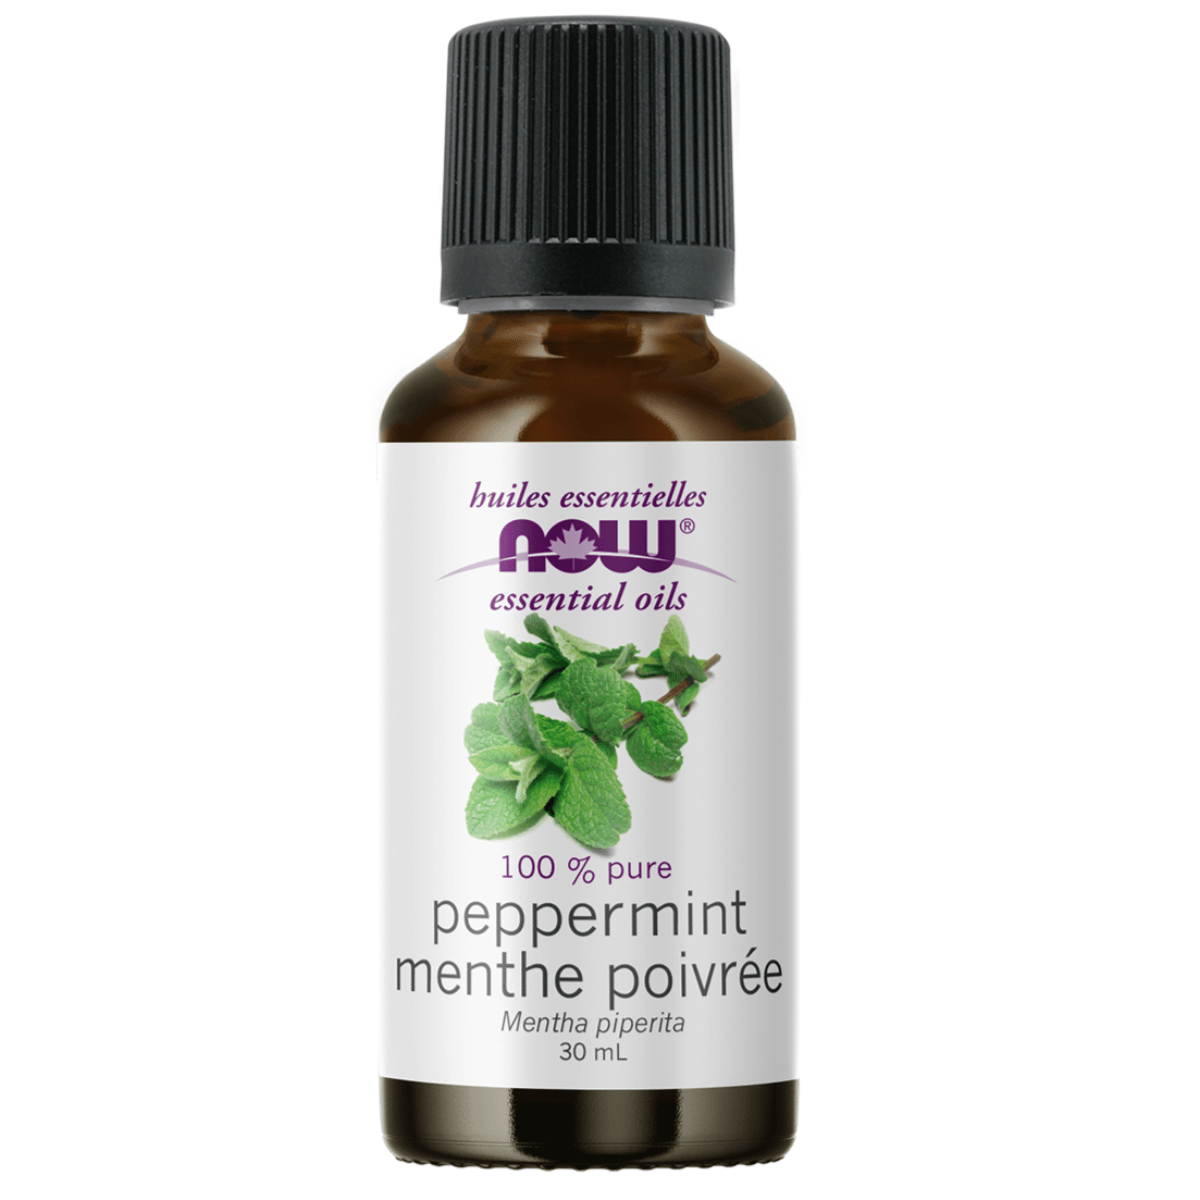 NOW Peppermint Oil 30mL Essential Oils at Village Vitamin Store